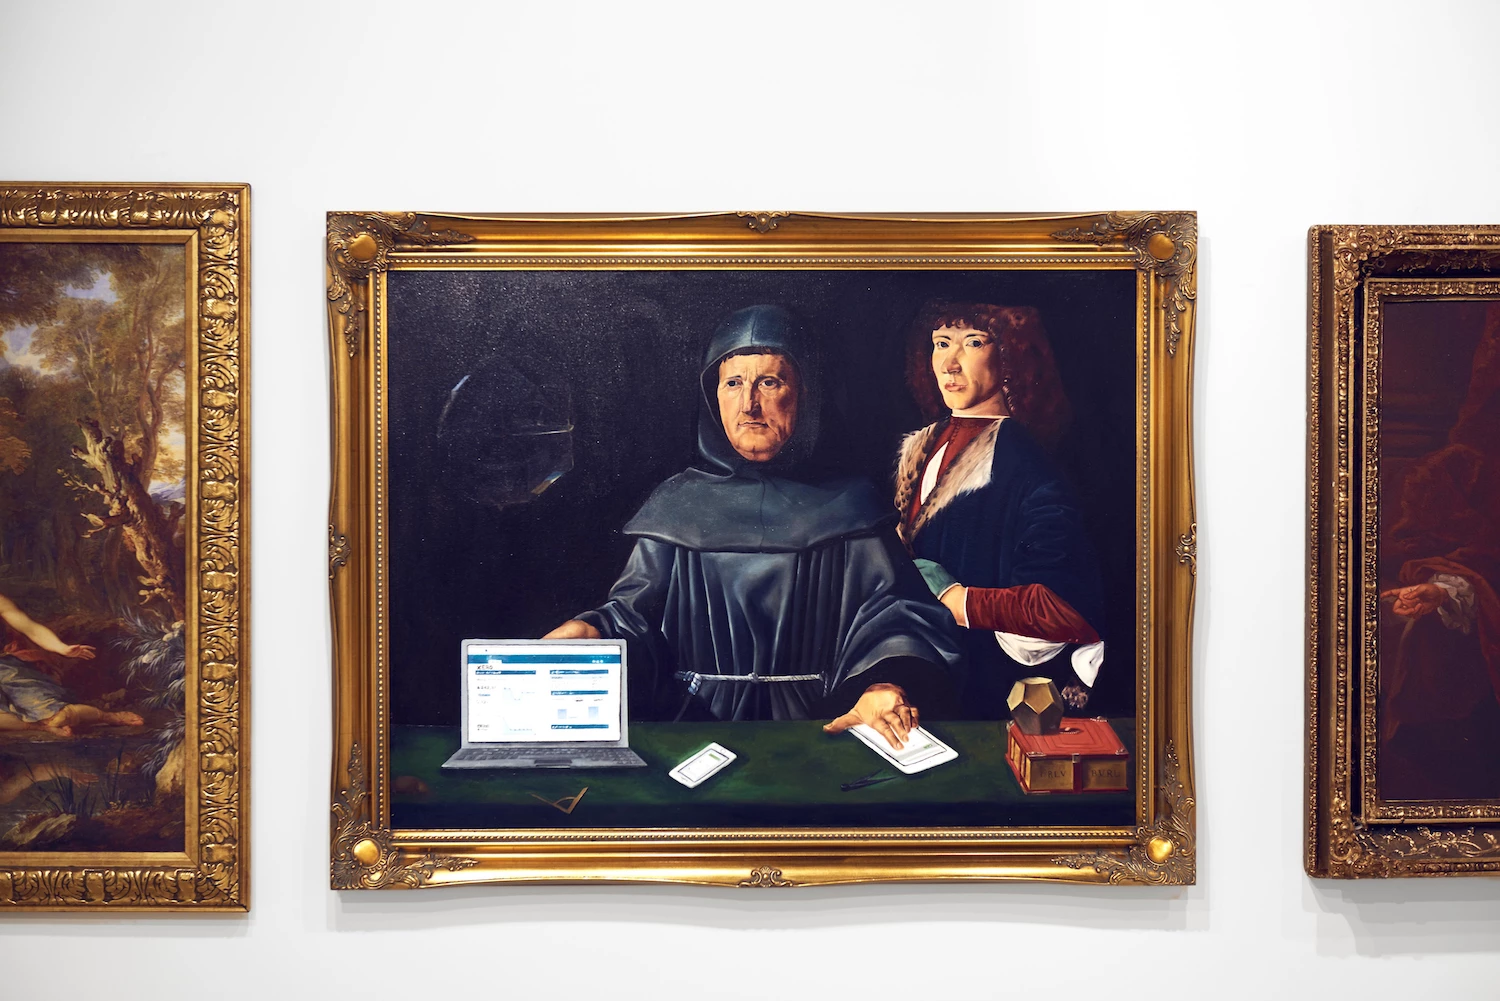 Renaissance artist China Jordan has repainted the portrait originally dated to around 1500 of the "Father of Accounting and Bookkeeping", Luca Pacioli, updating his paper ledger with a tablet and laptop to inspire accountants to move to cloud software. 